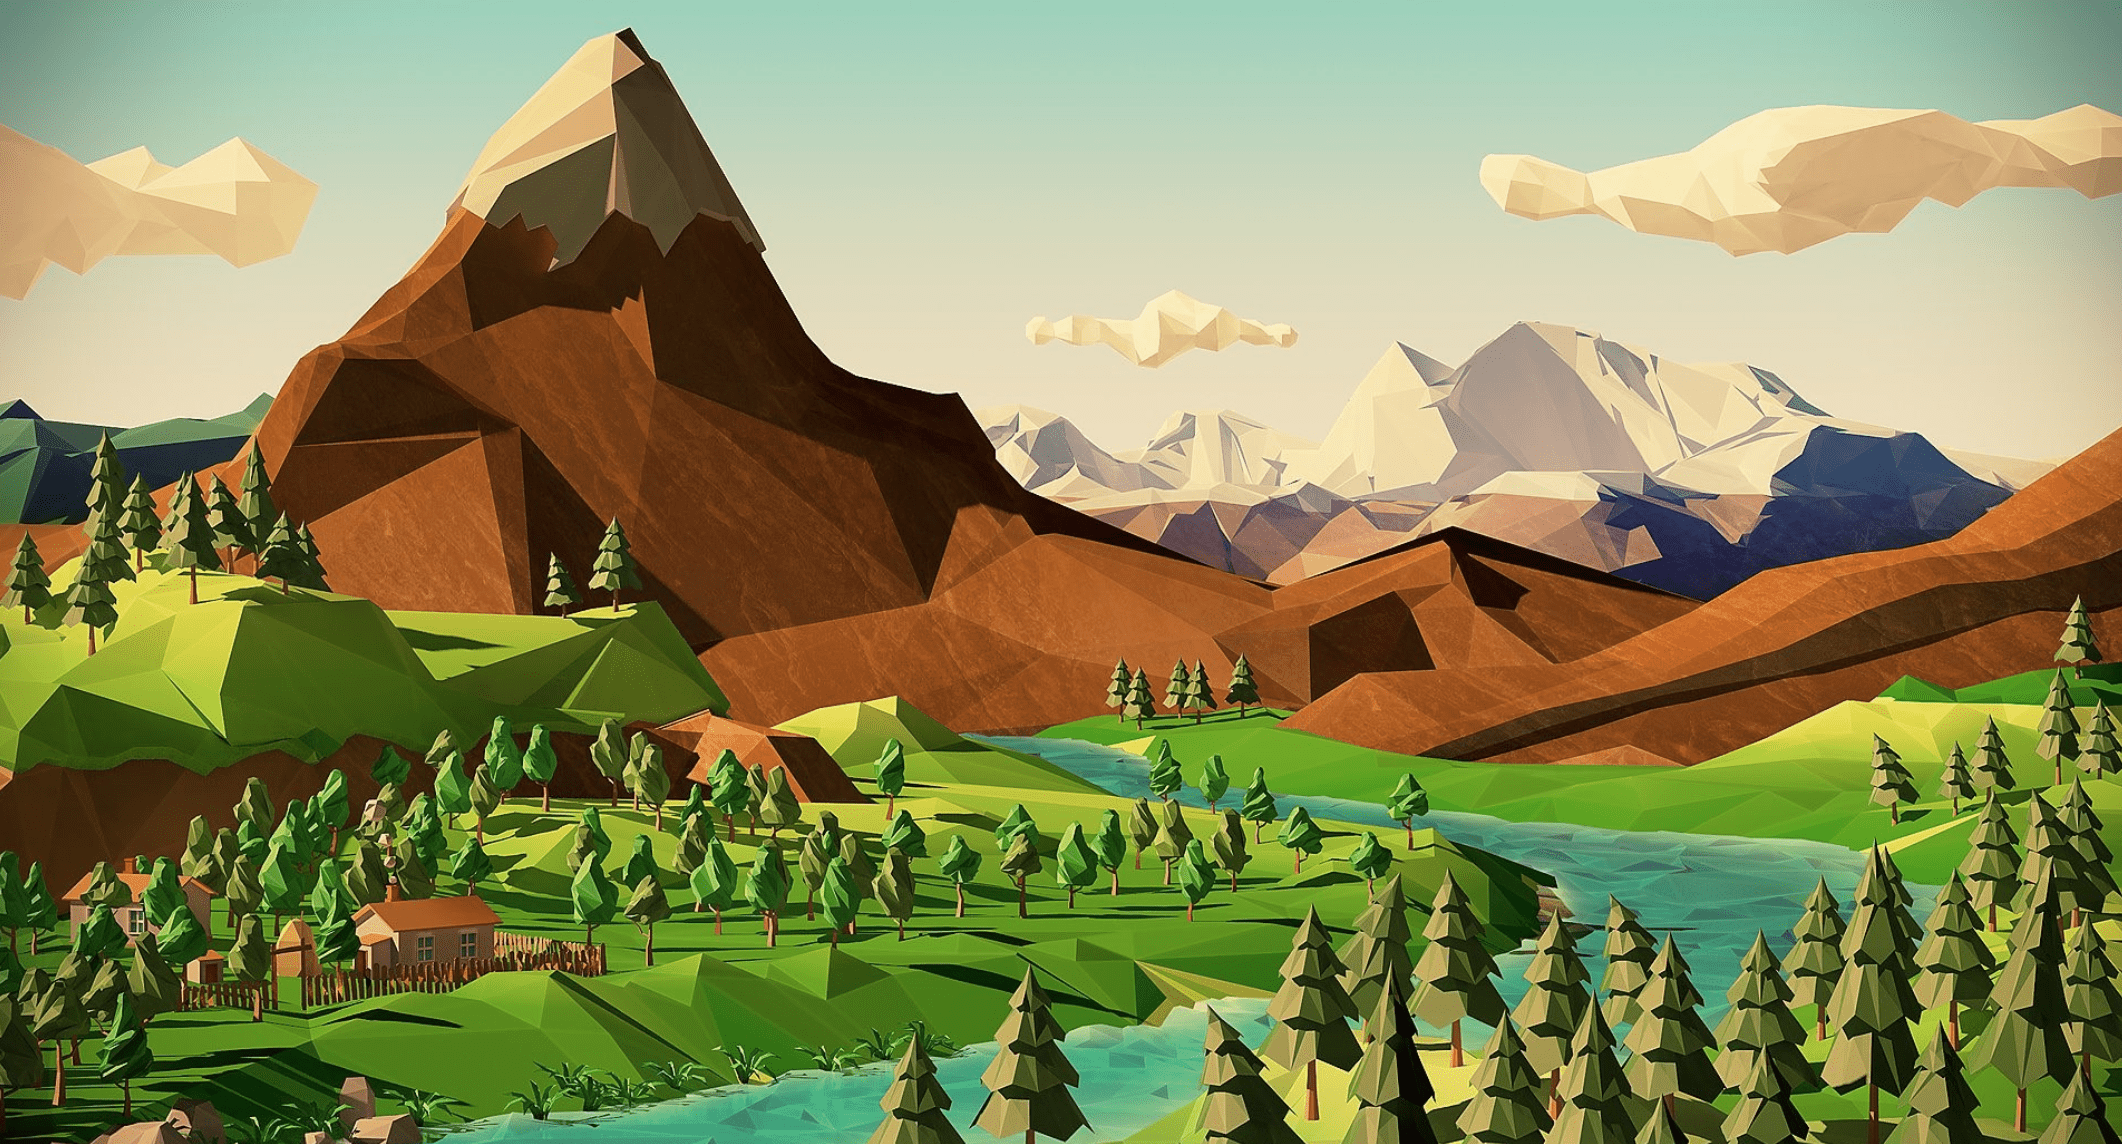 A low poly illustration of a mountain range with a forest in the foreground - Low poly